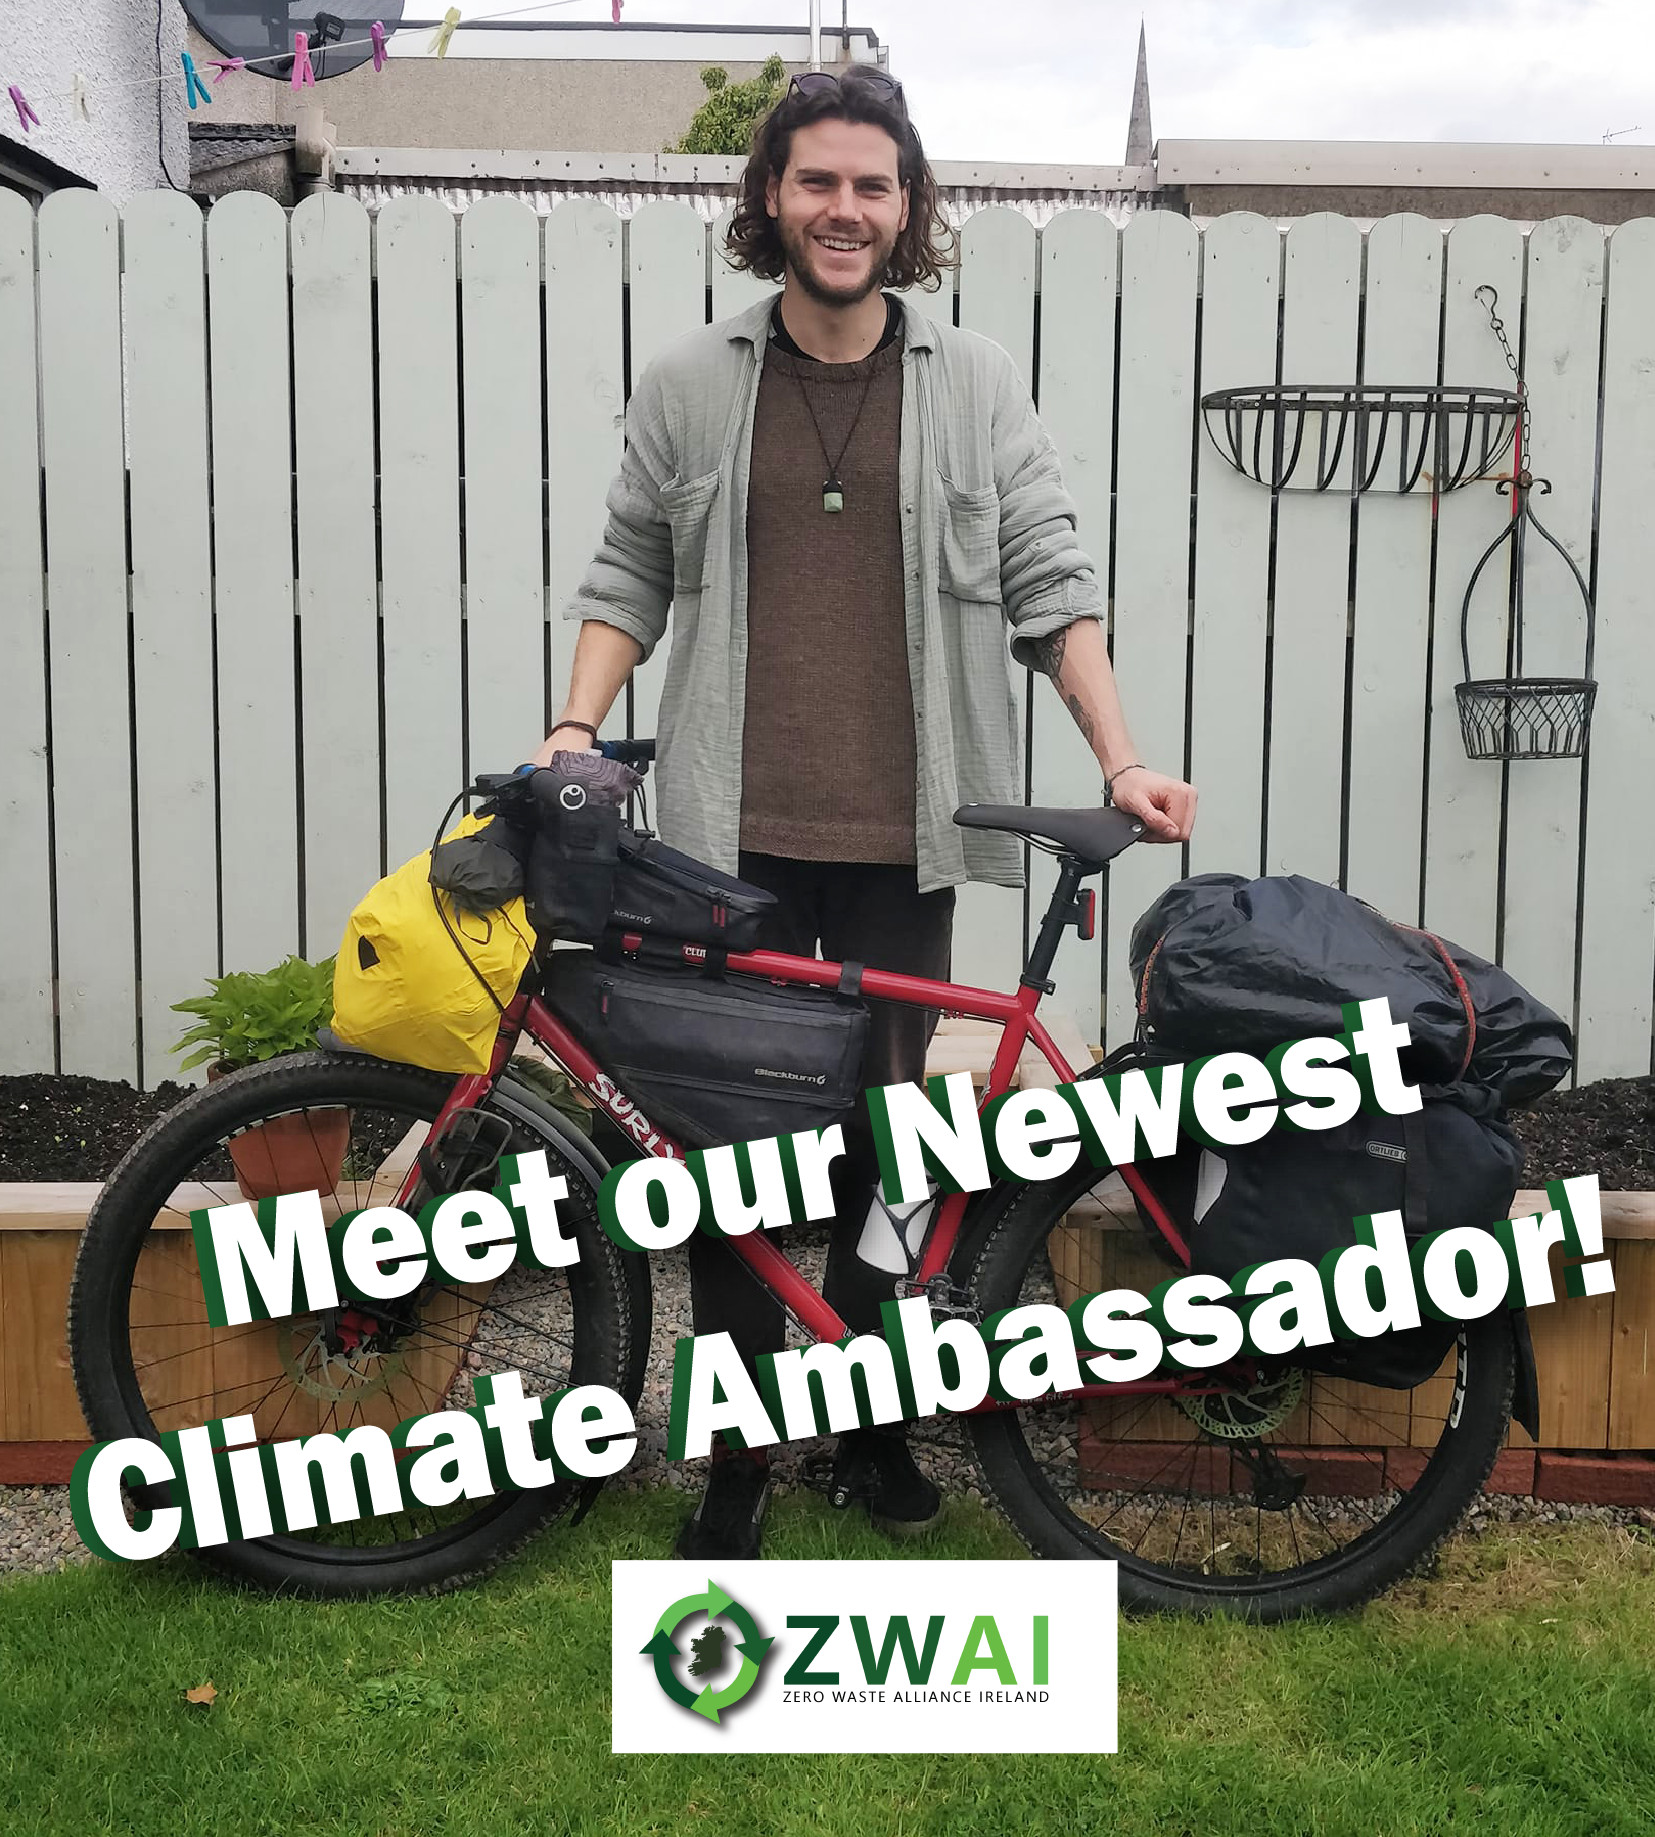 Cycling for Zero Waste: Observations by Niall After his Adventure